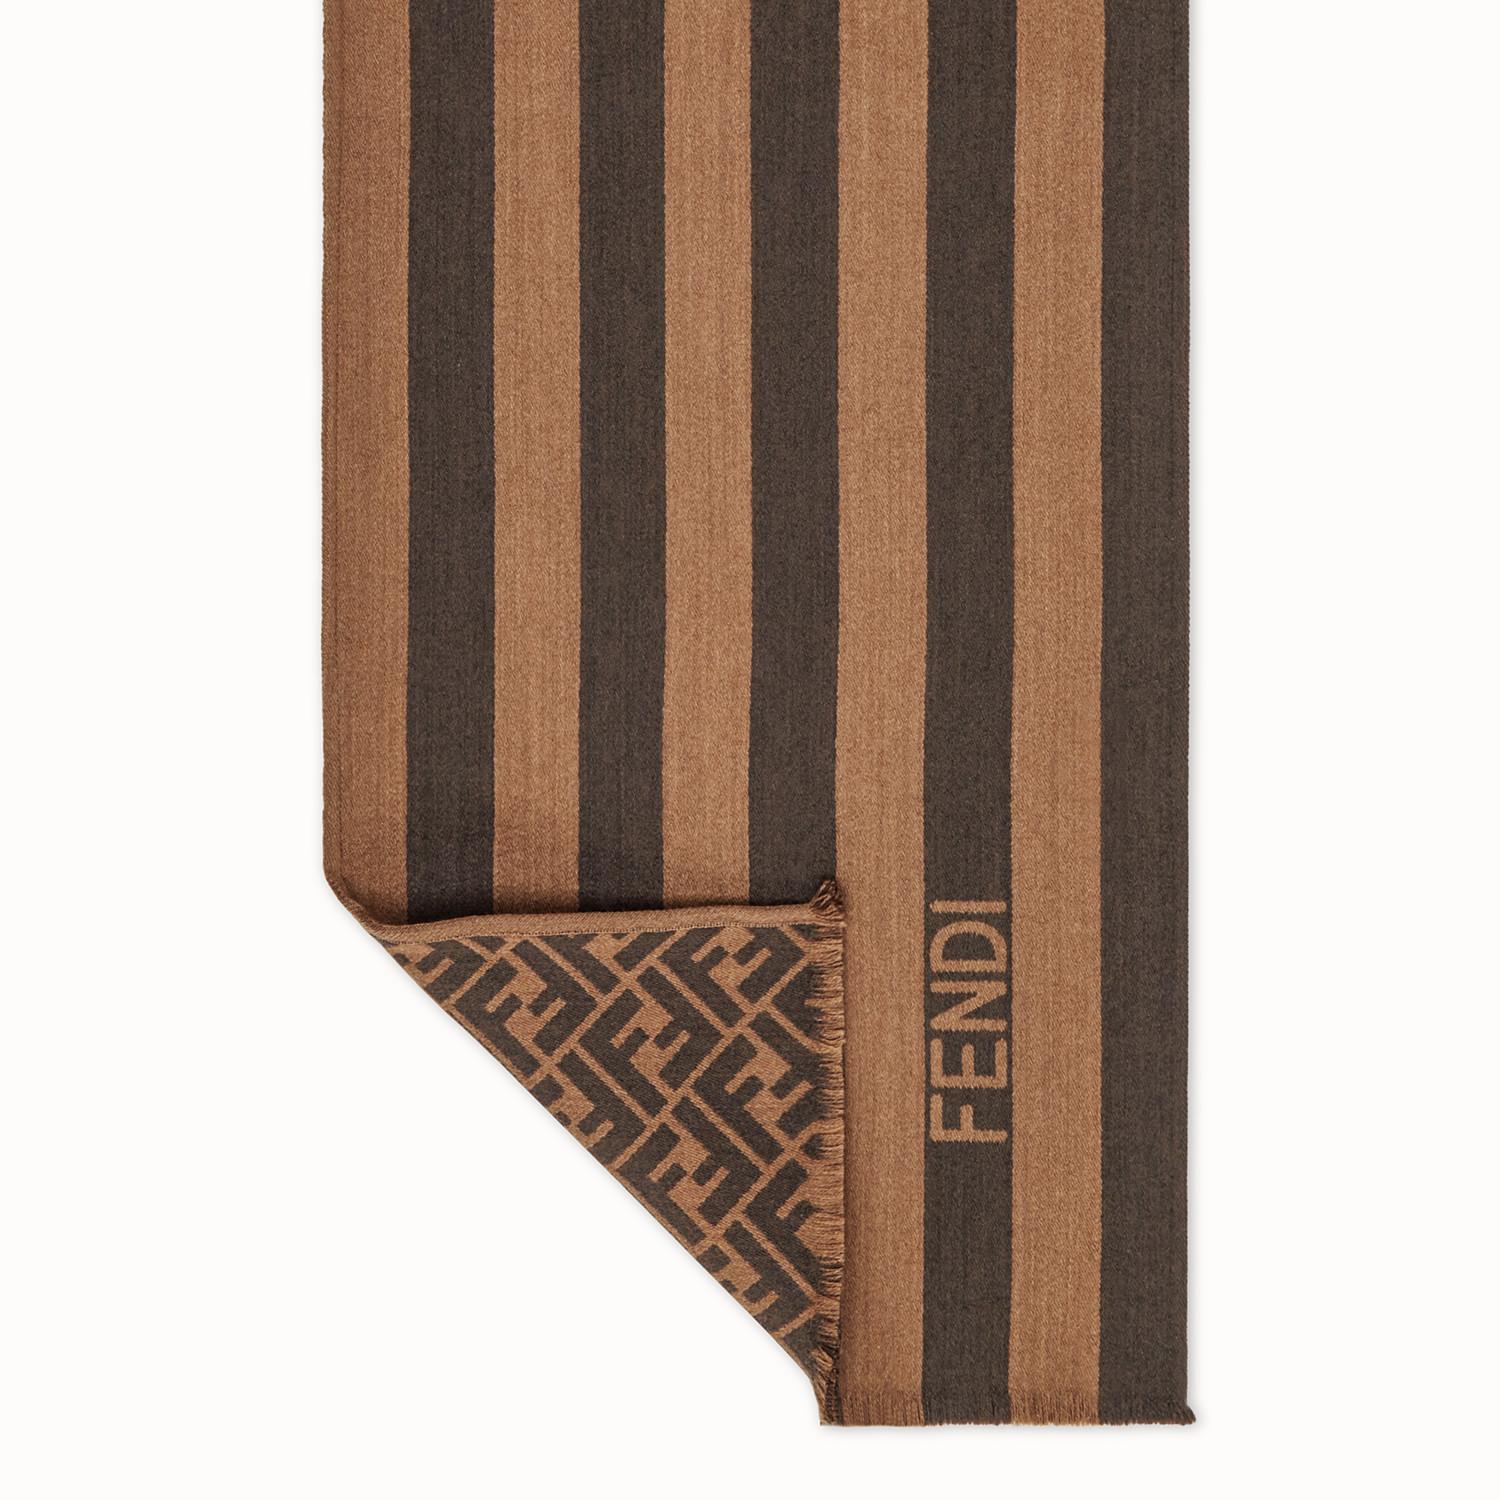 Fendi Cashmere Scarf in Brown for Men - Lyst